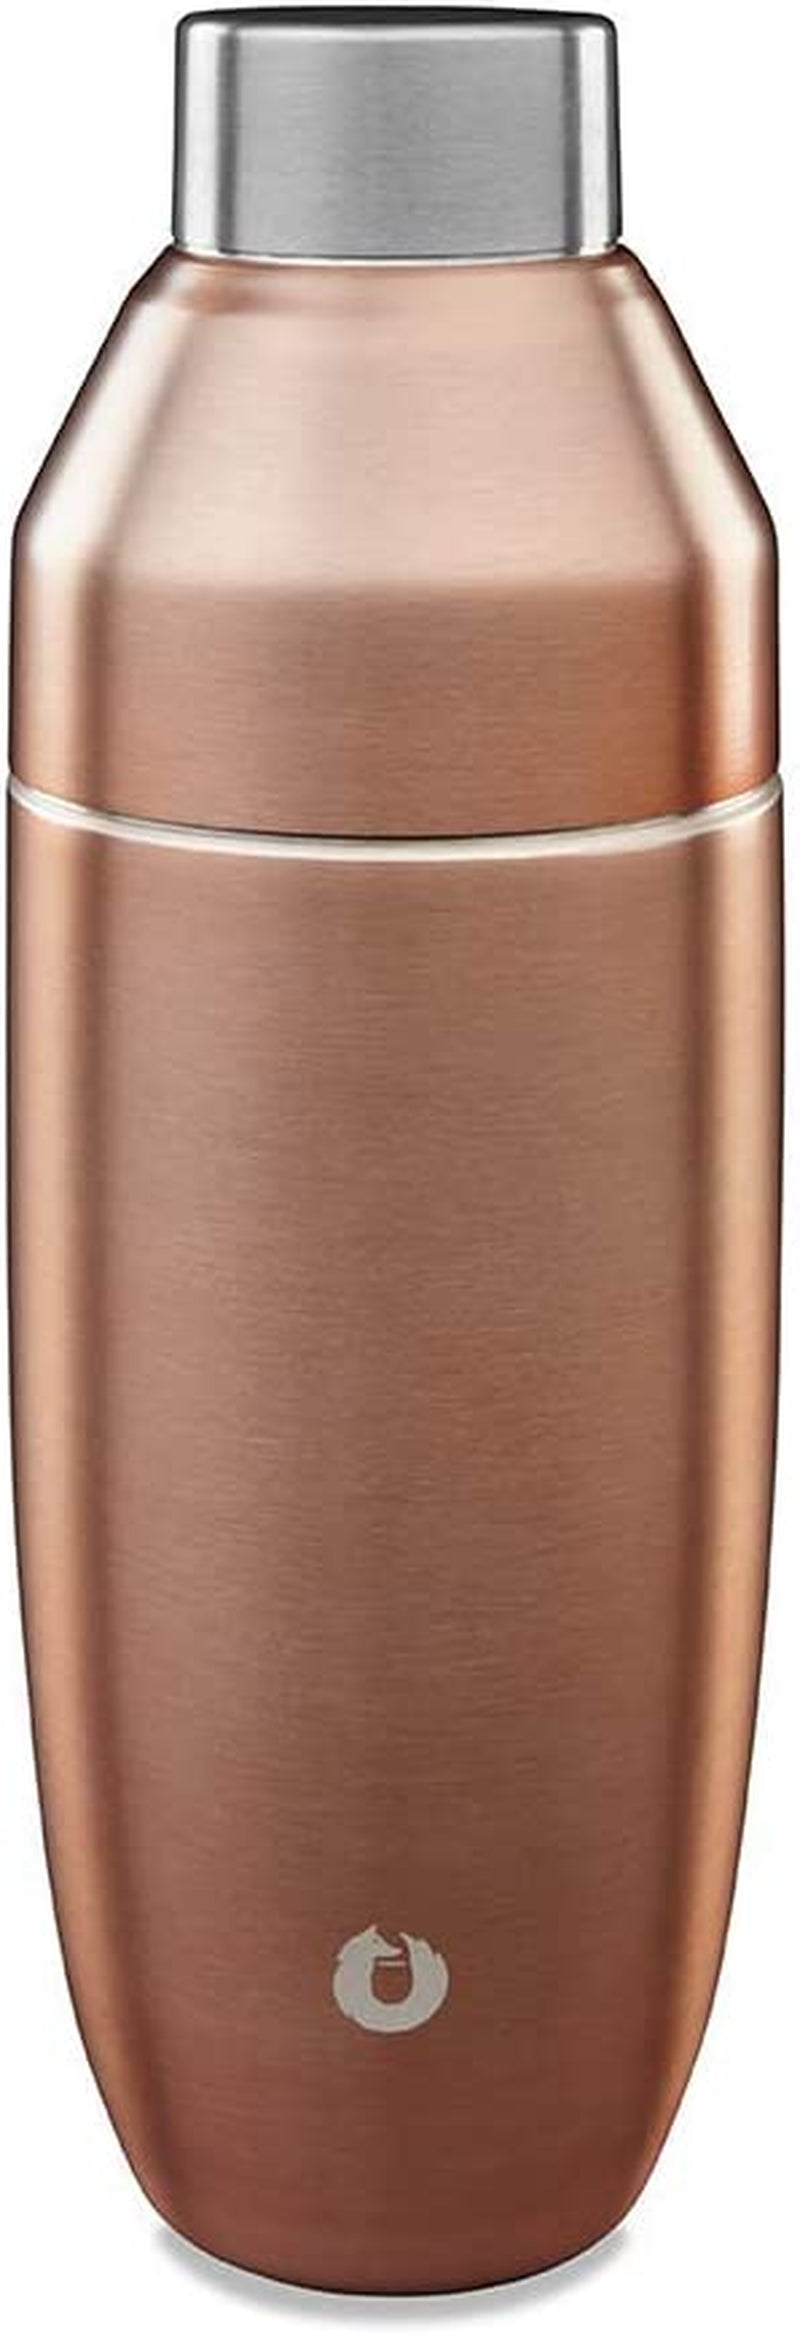 SNOWFOX C90024-15 Premium Vacuum Insulated Stainless Steel Cocktail Shaker-Home Bar Accessories-Elegant Drink Mixer-Leak-Proof Lid With Jigger & Built-In Strainer-Black/Gold-22oz.